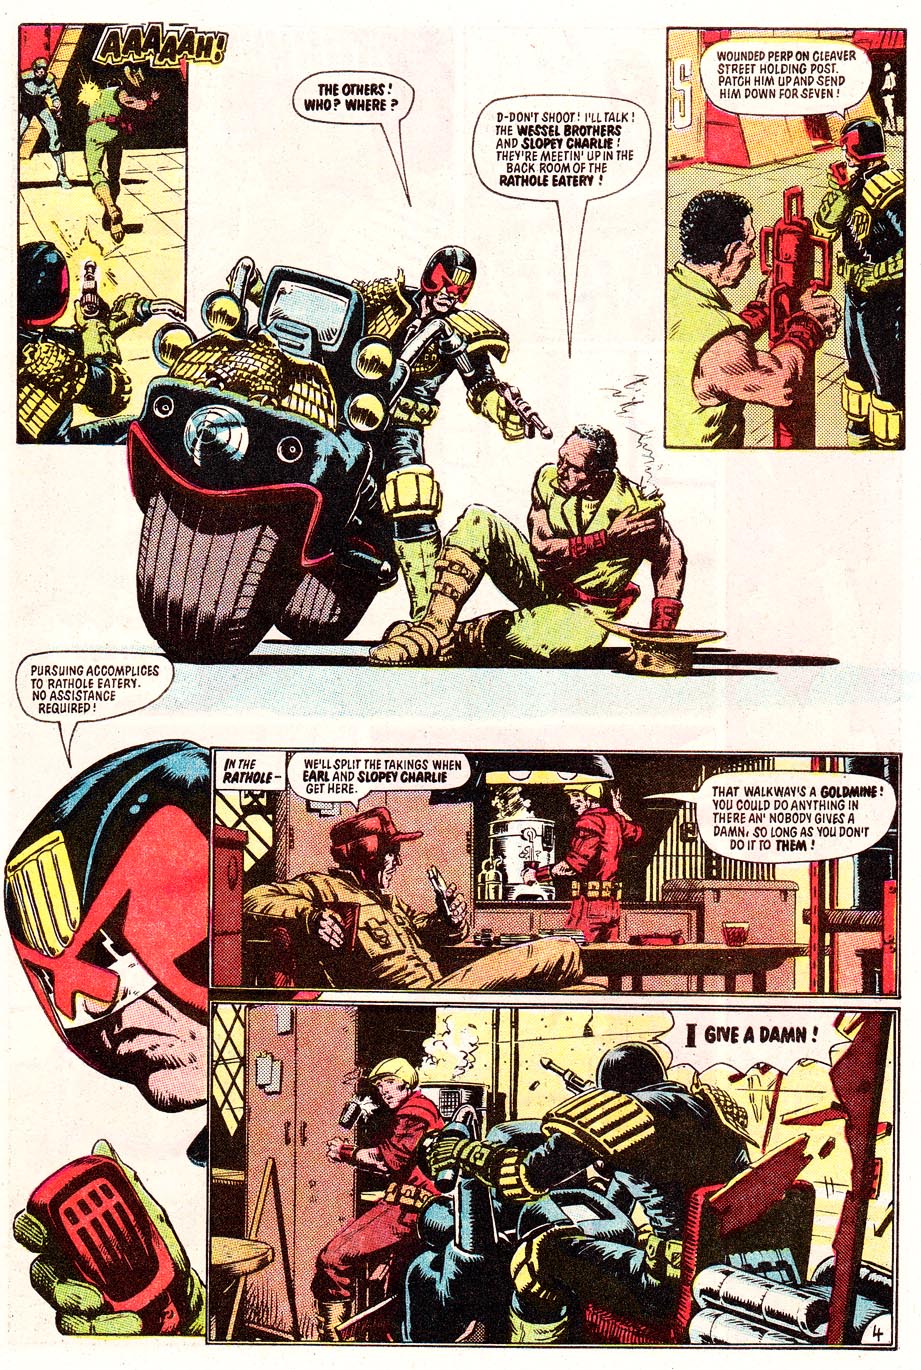 Read online Judge Dredd: The Complete Case Files comic -  Issue # TPB 4 - 314